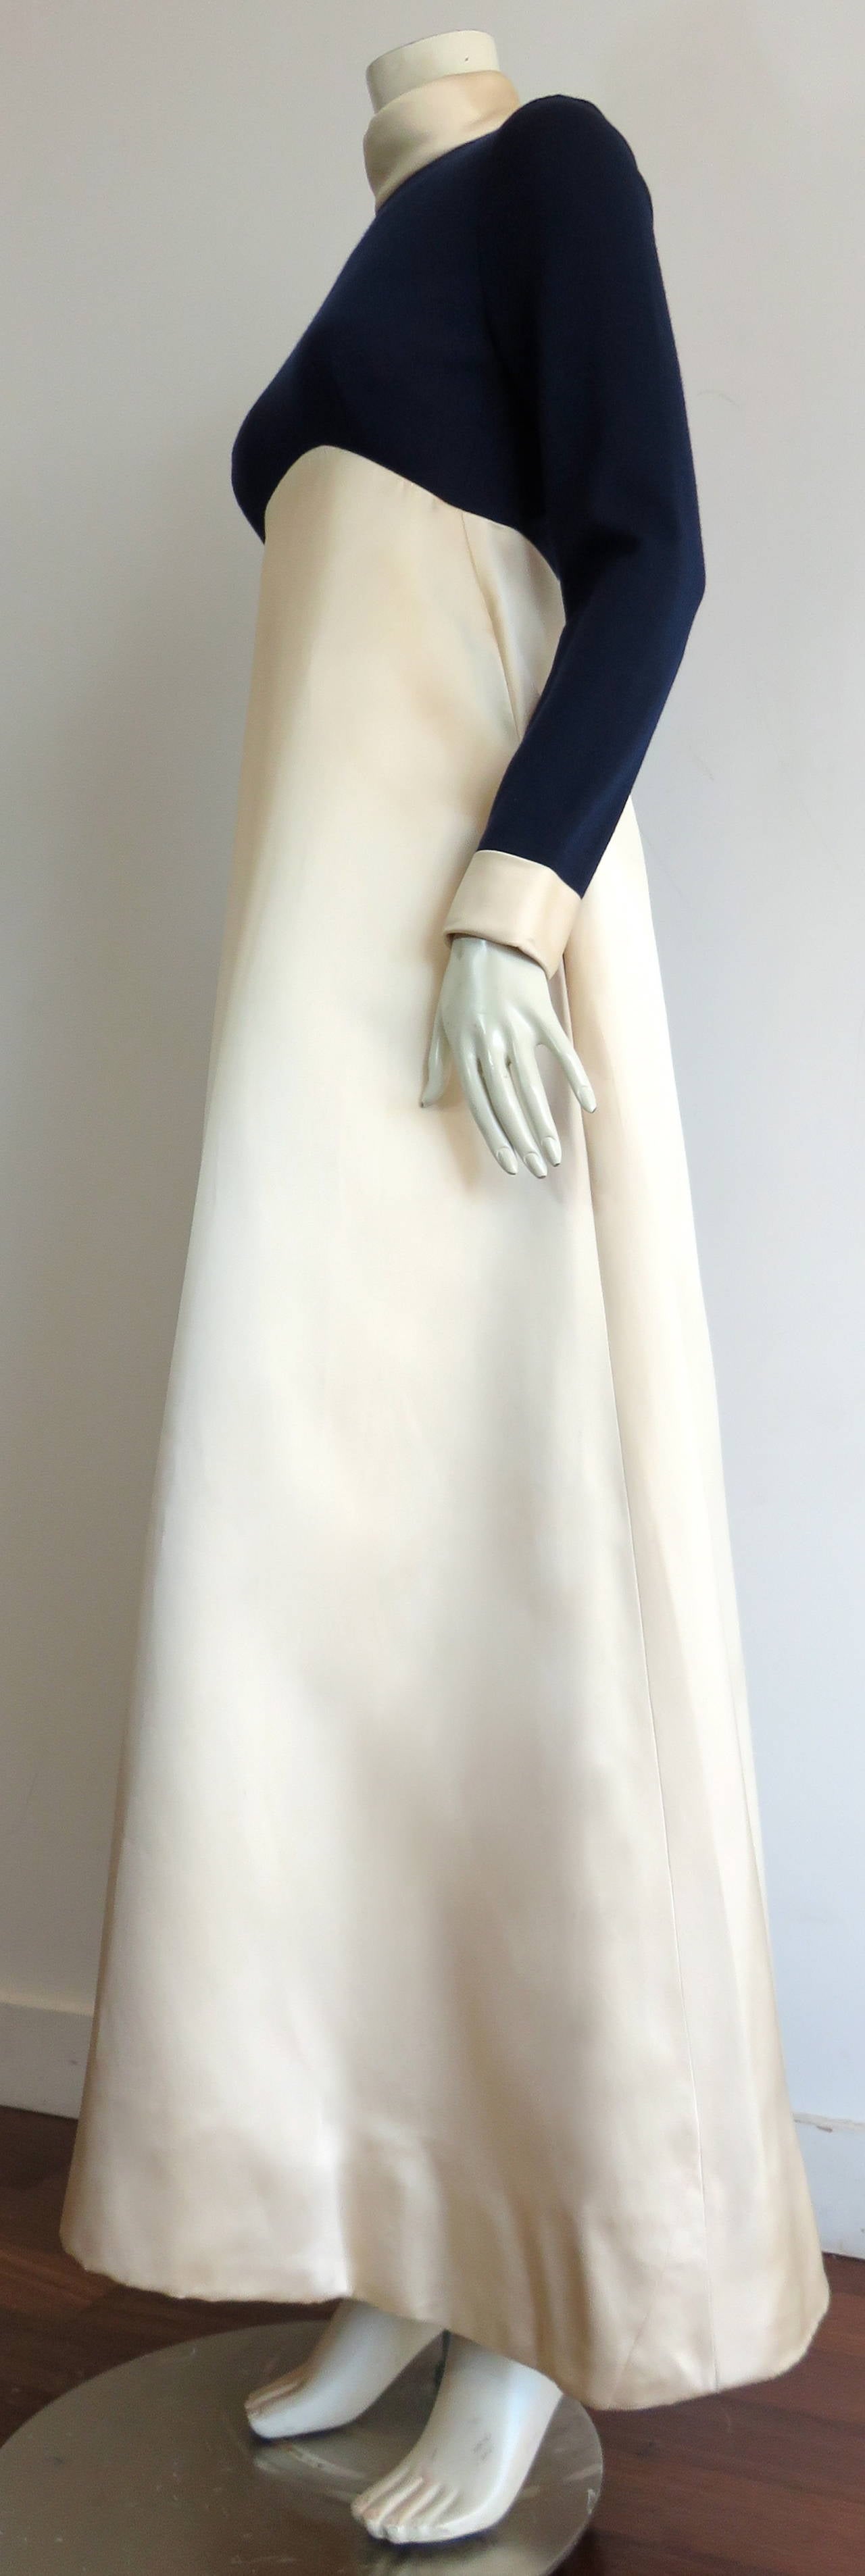 1960's GEOFFREY BEENE Satin & jersey evening gown dress In Good Condition For Sale In Newport Beach, CA